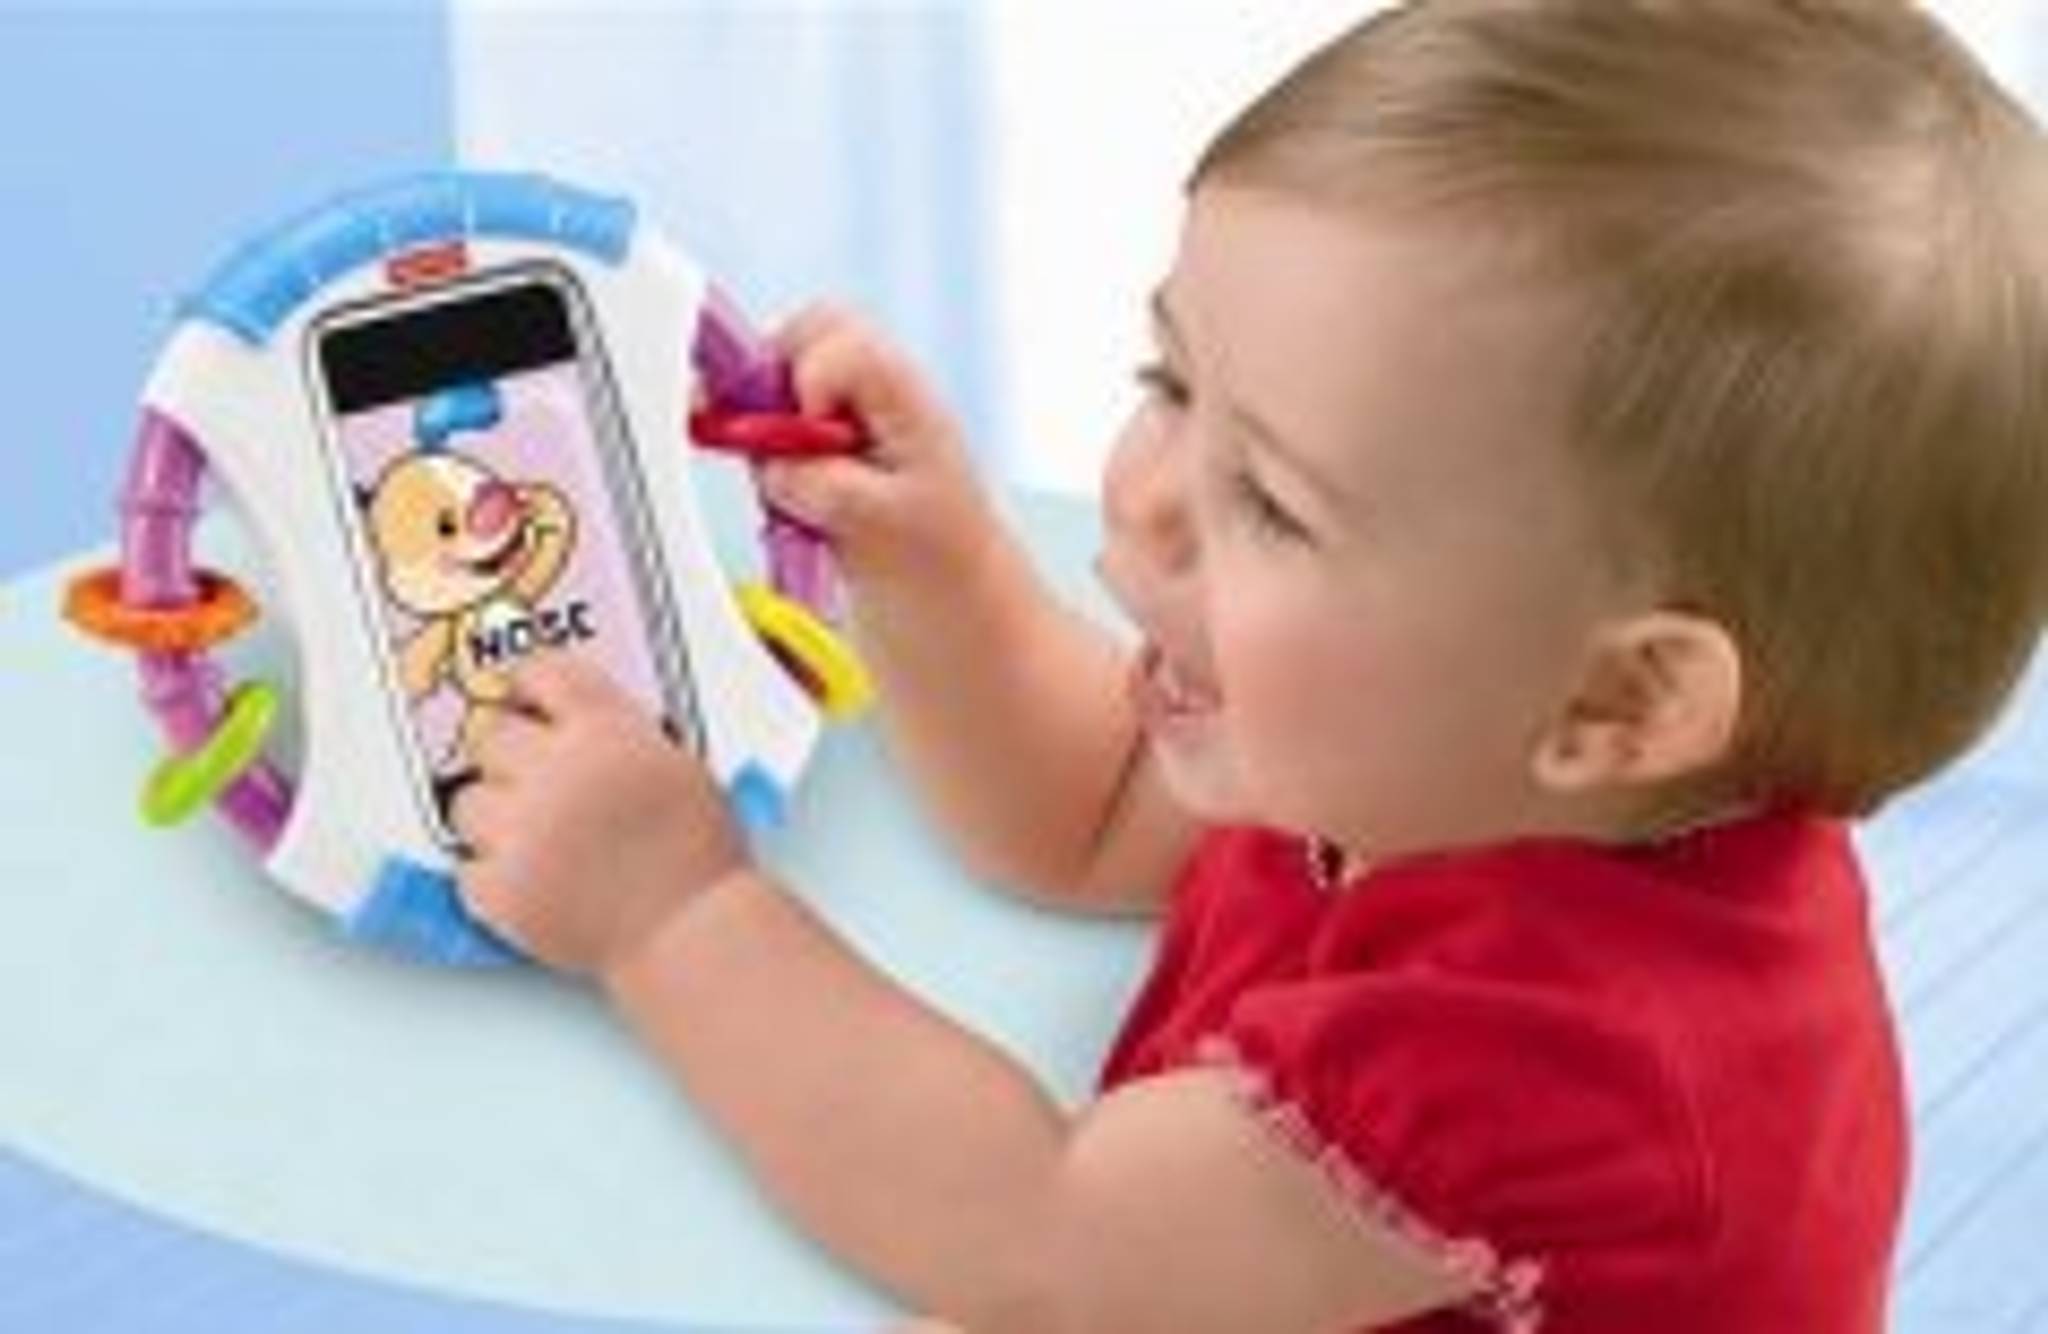 iPhone becomes baby toy